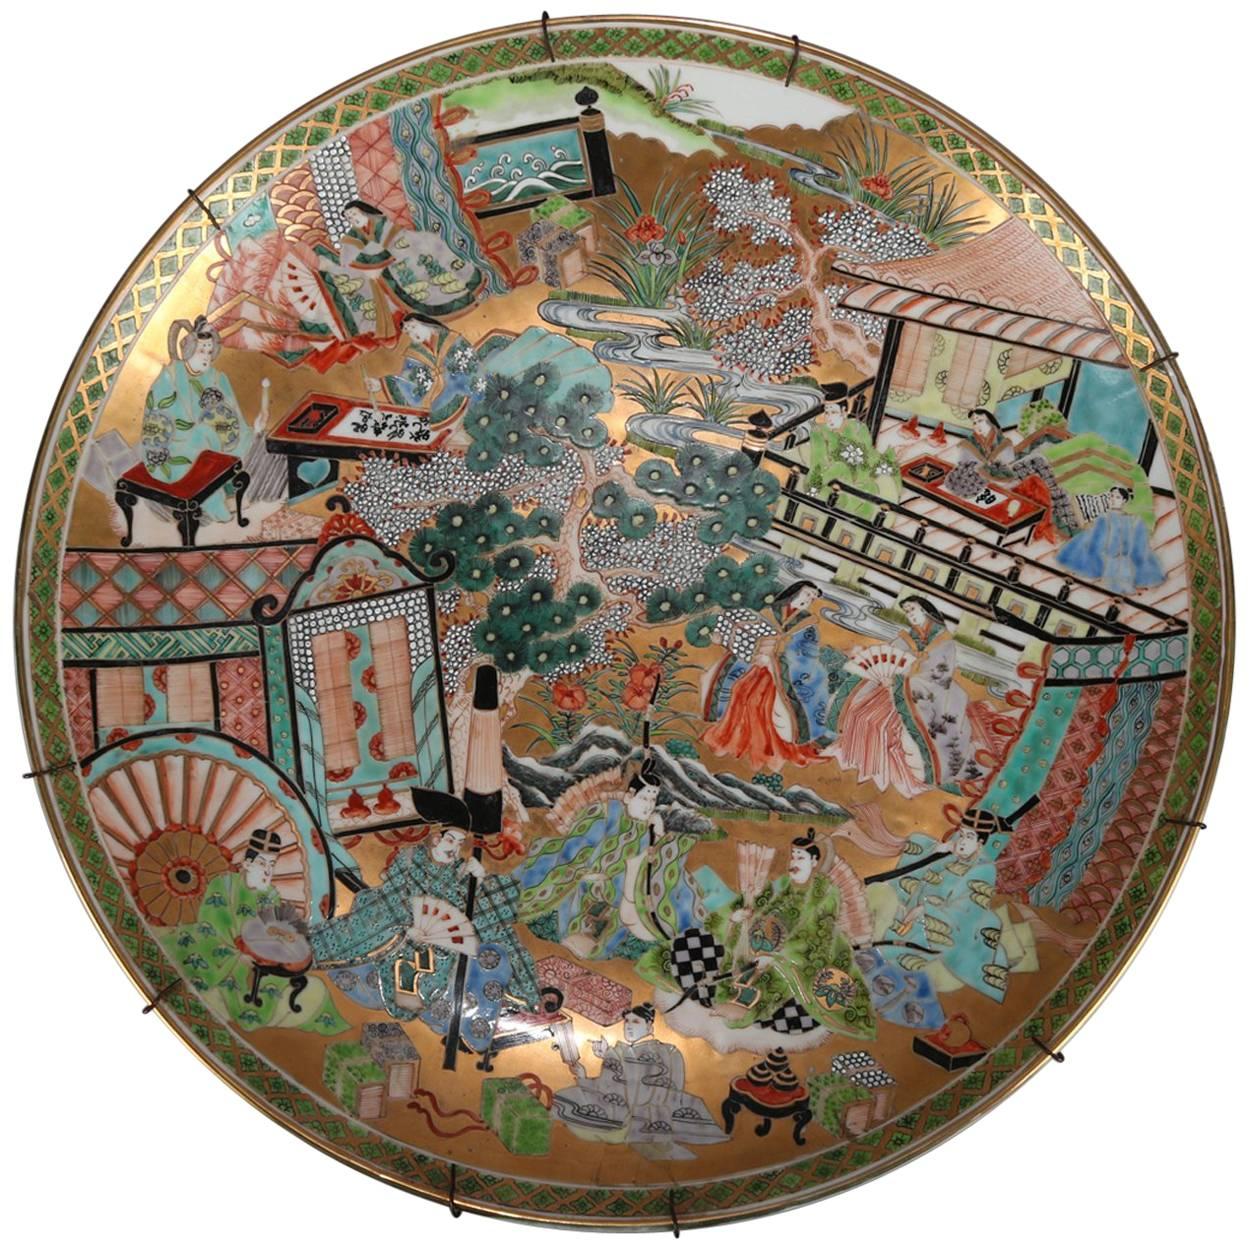 Antique Japanese Kutani Hand-Painted and Gilt Porcelain Charger, circa 1900